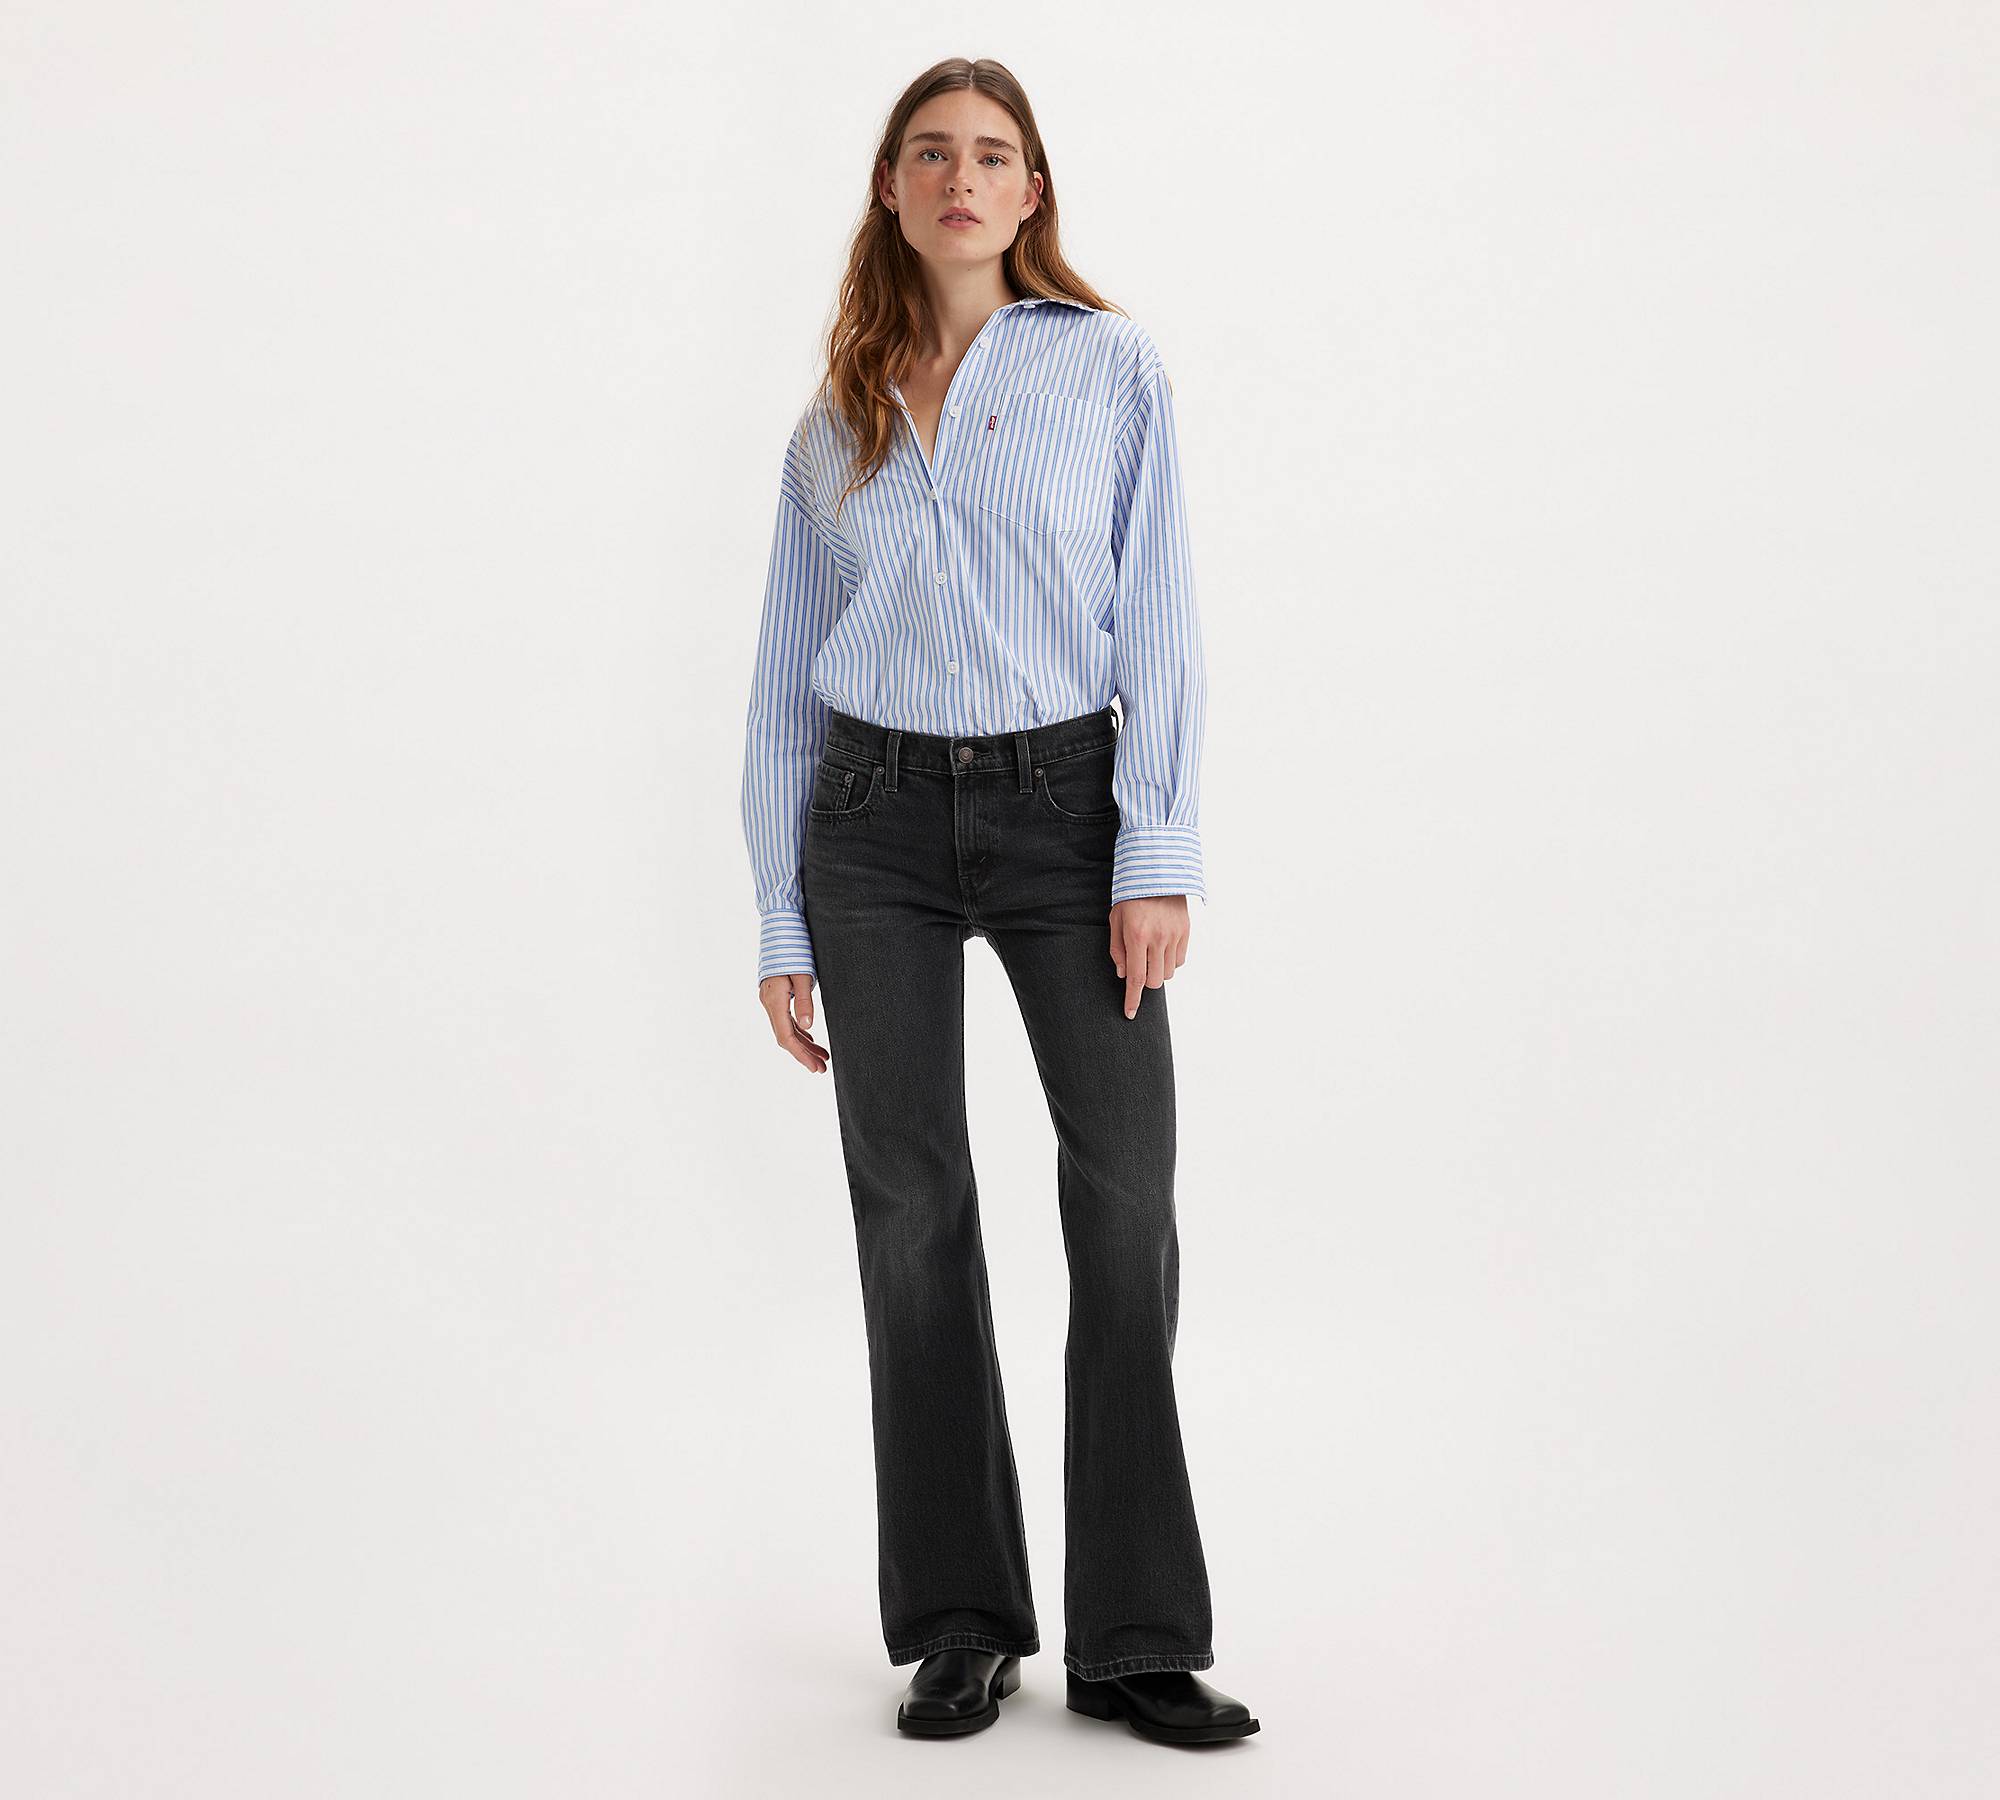 Middy Ankle Flare Women's Jeans - Black | Levi's® US